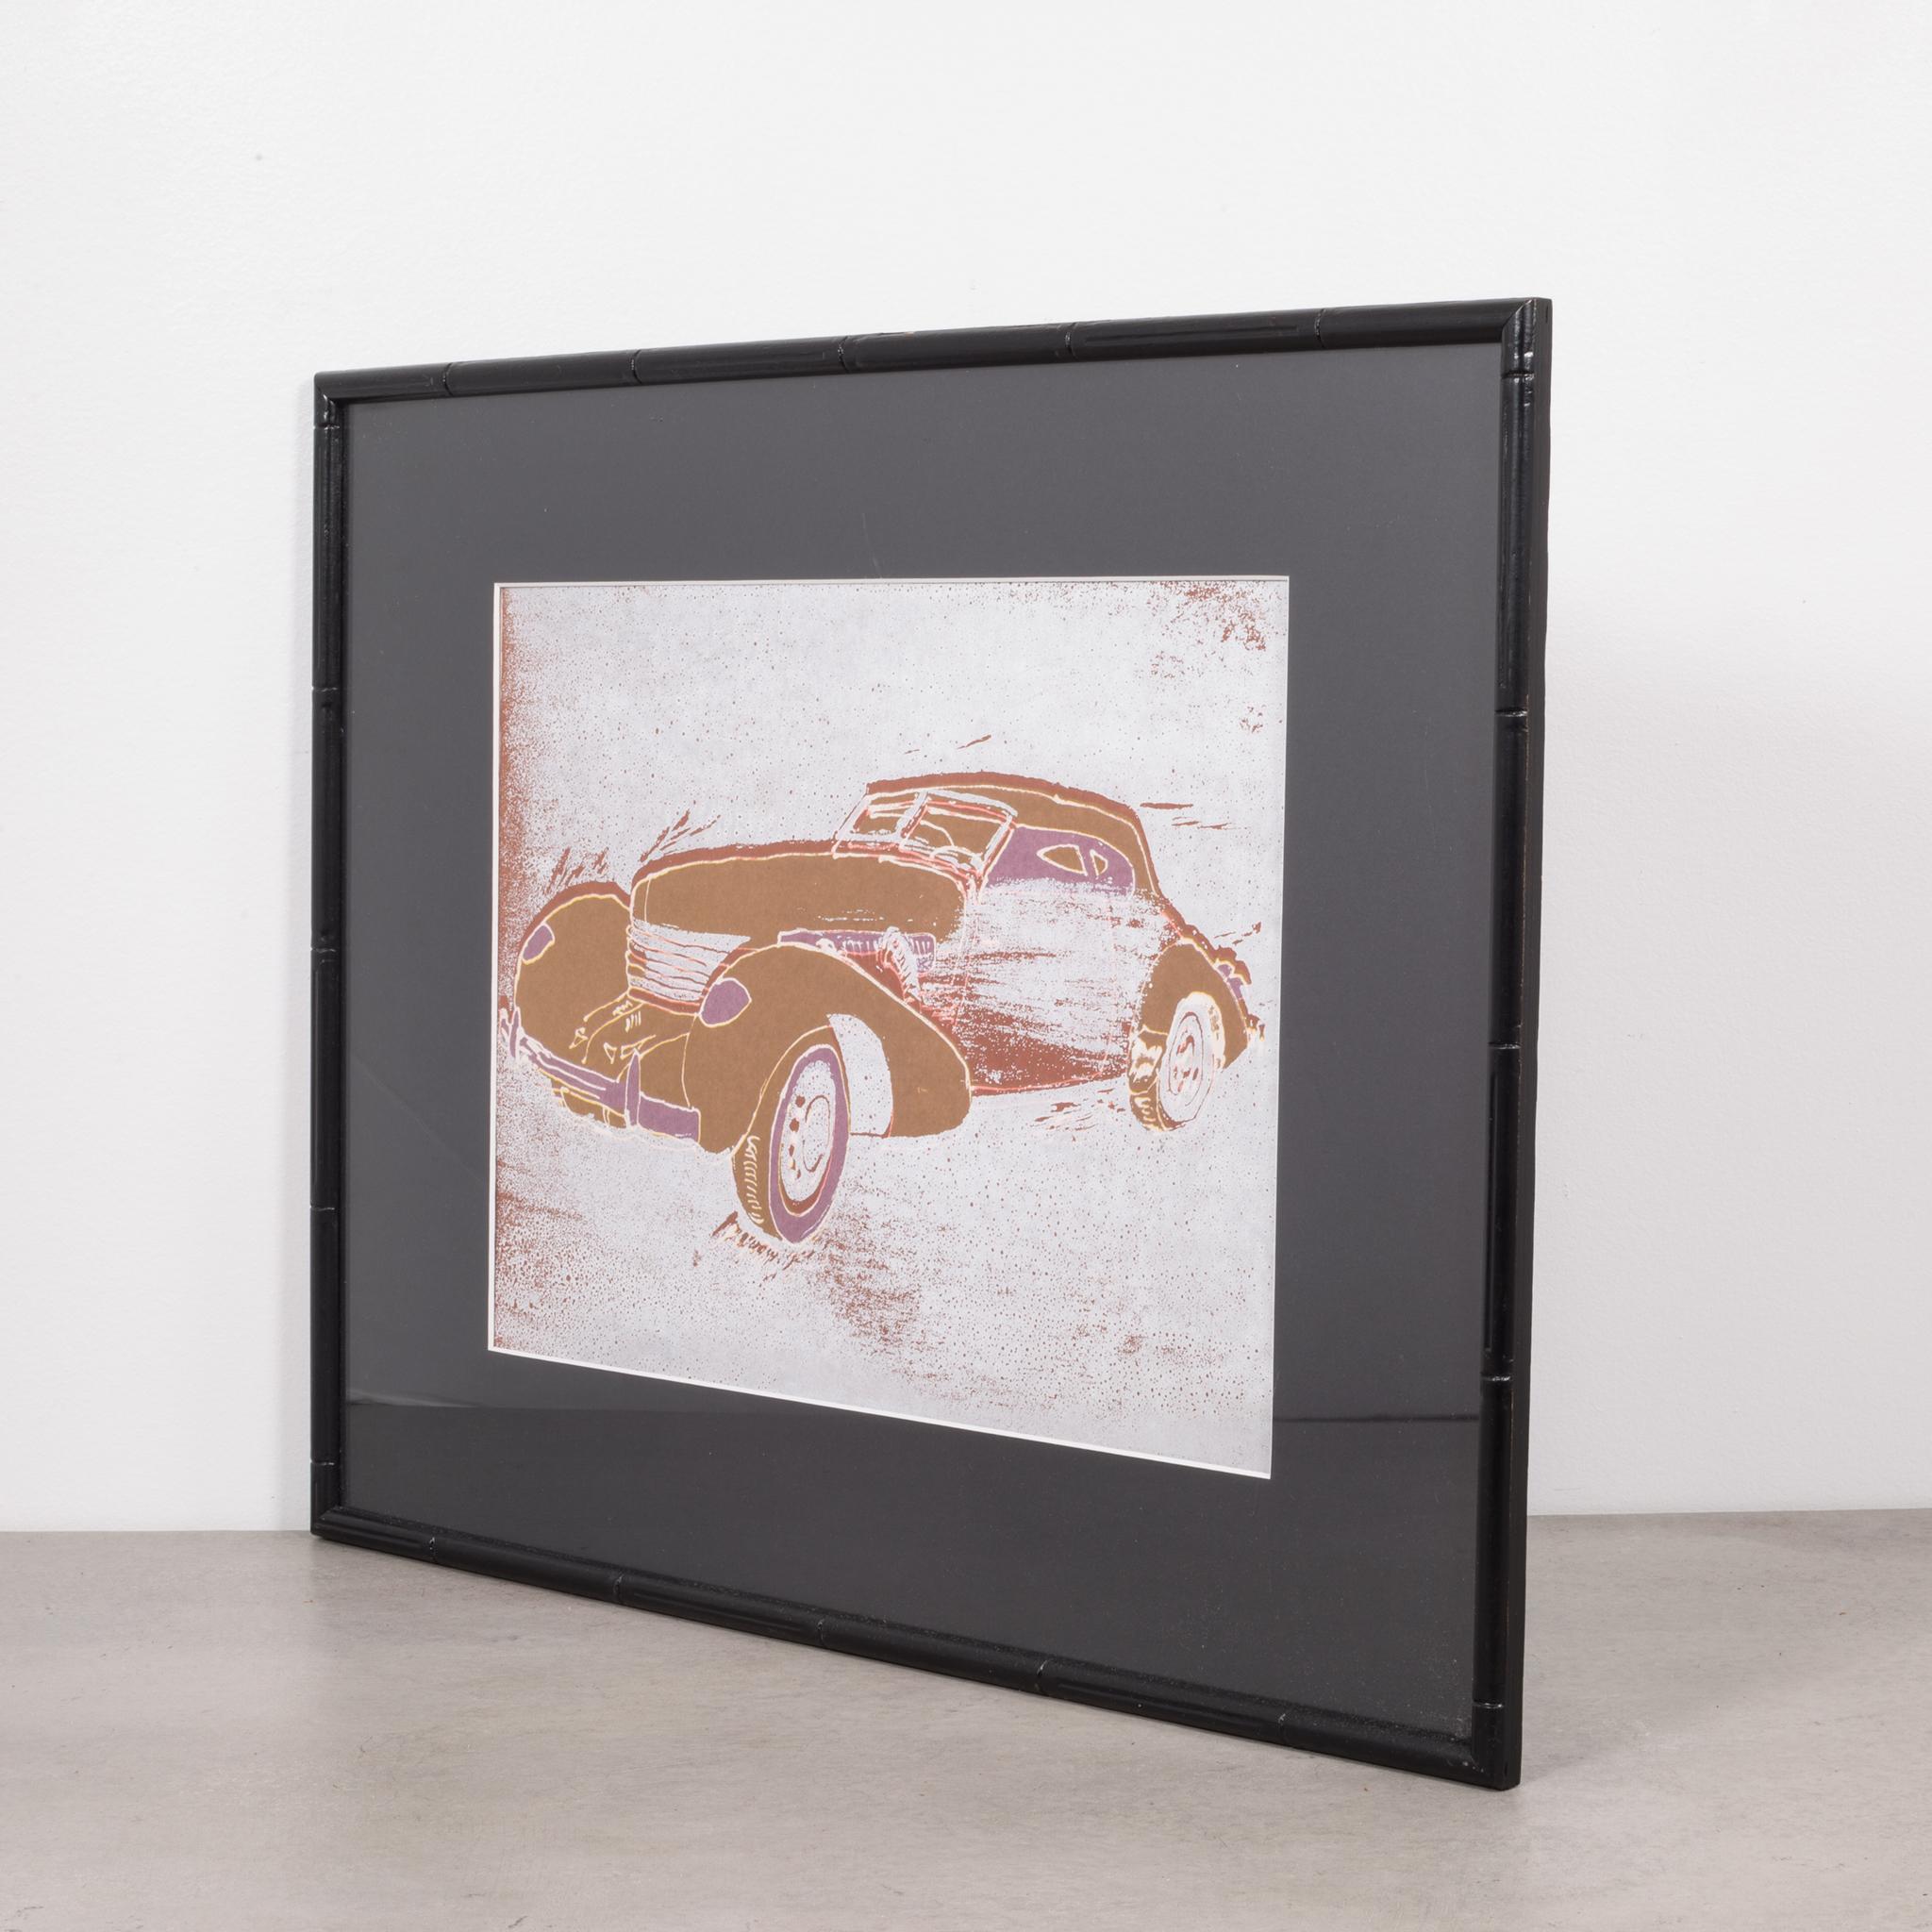 One piece has sold. There are 4 now. 

About

This is an original offset lithograph car series framed in a painted, faux bamboo vintage frame. Each piece has been recently professionally framed. There are four different colors of cars and the pieces